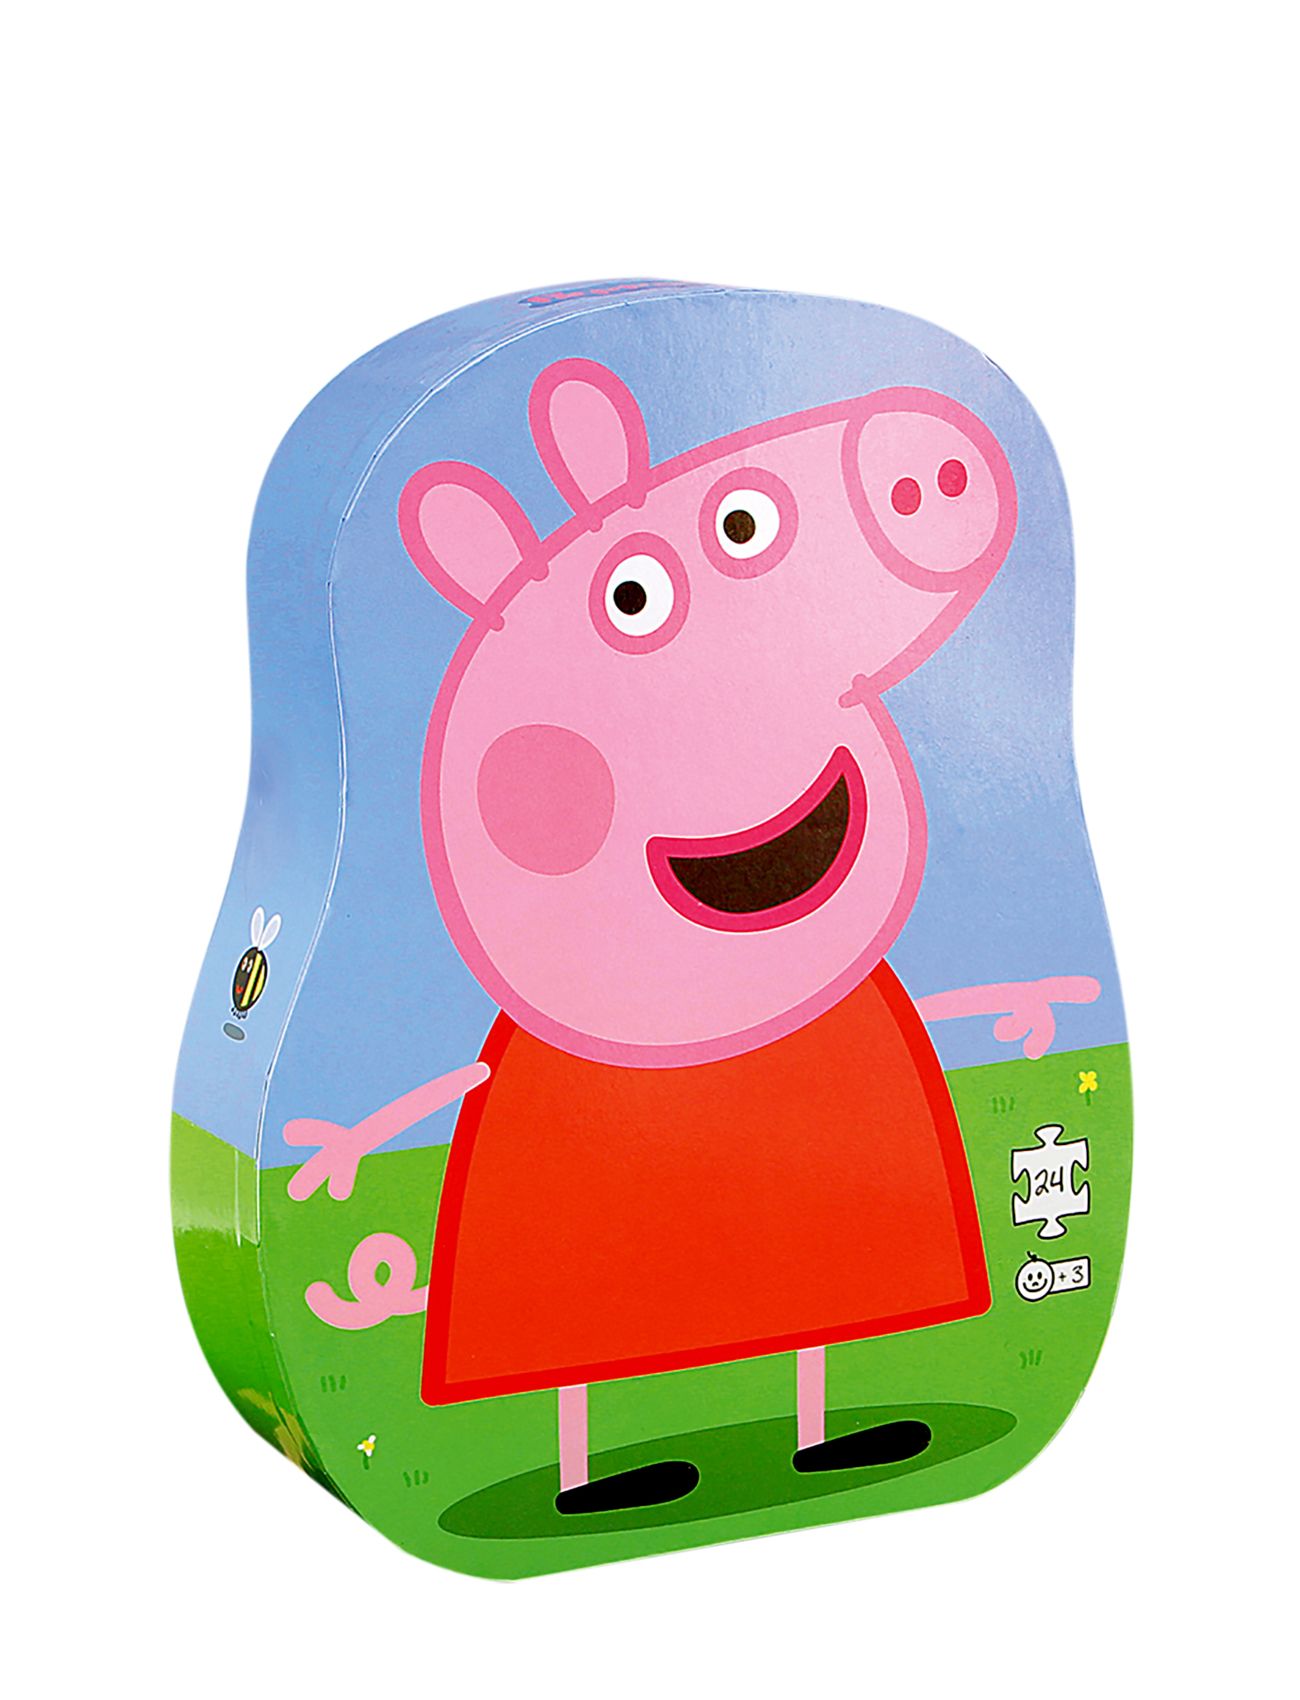 Peppa Pig Deco Puzzle Toys Puzzles And Games Puzzles Classic Puzzles Multi/patterned Gurli Gris